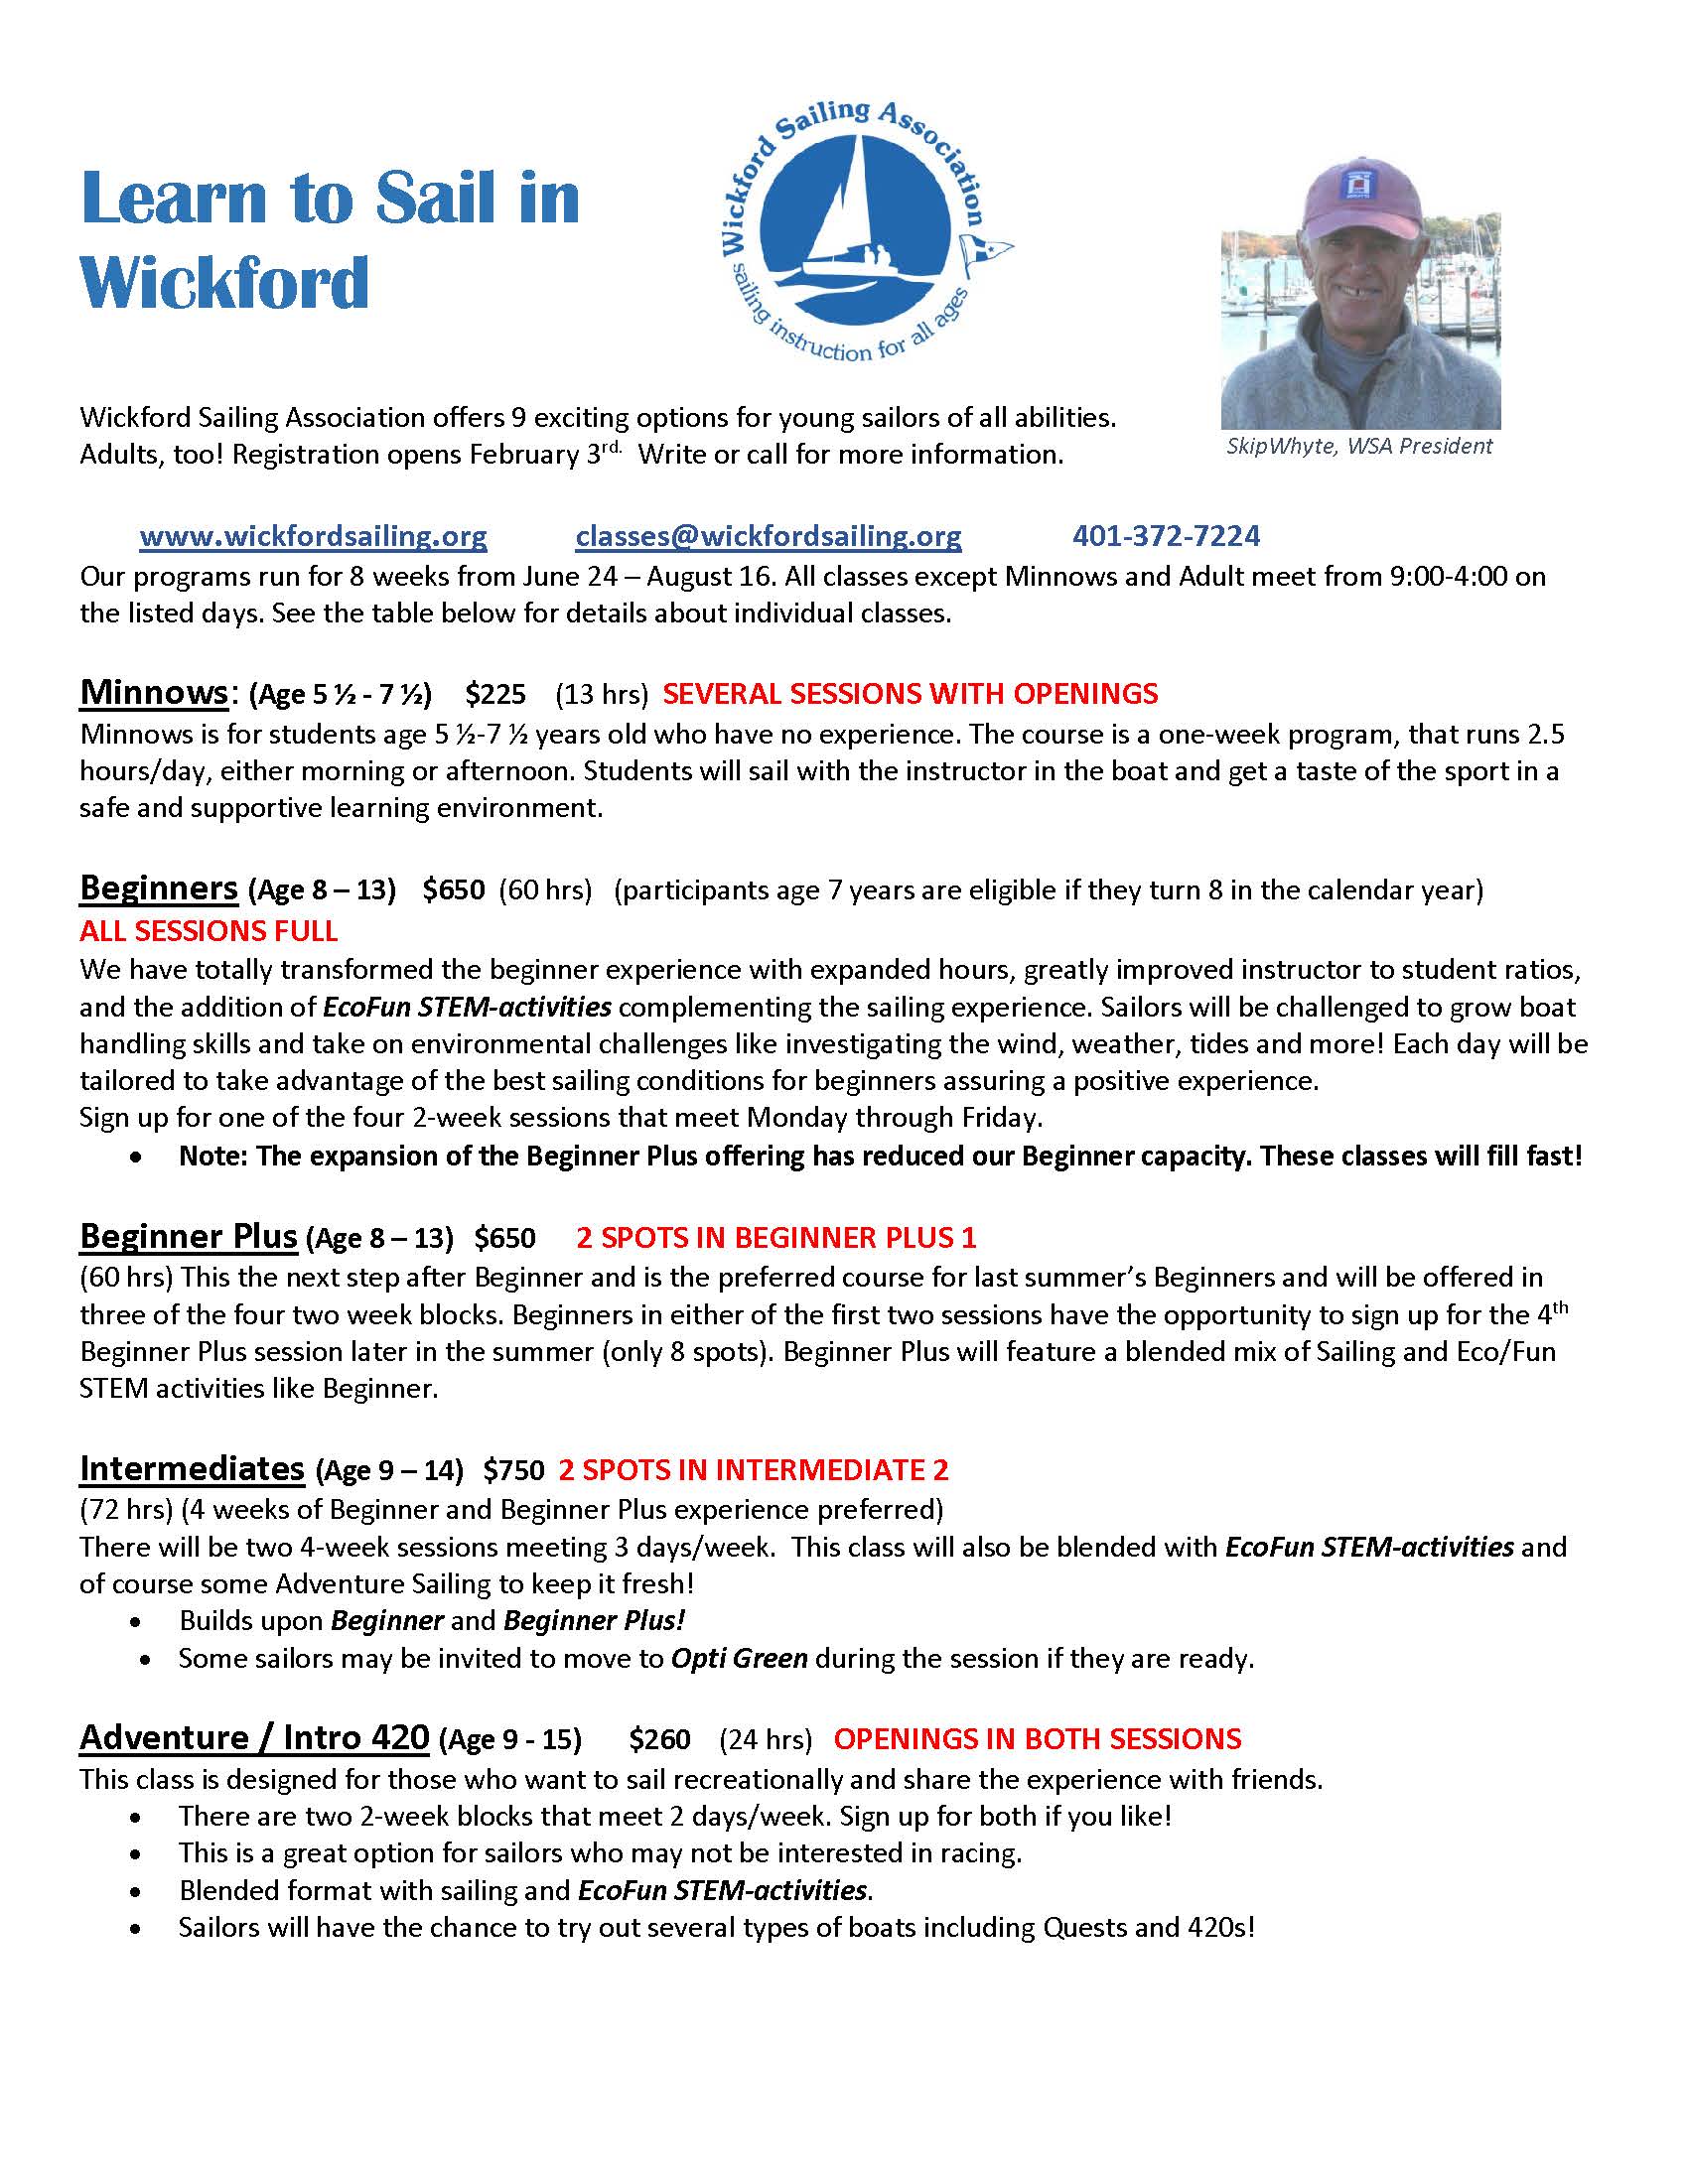 Wickford Sailing Lesson Flyer page 1